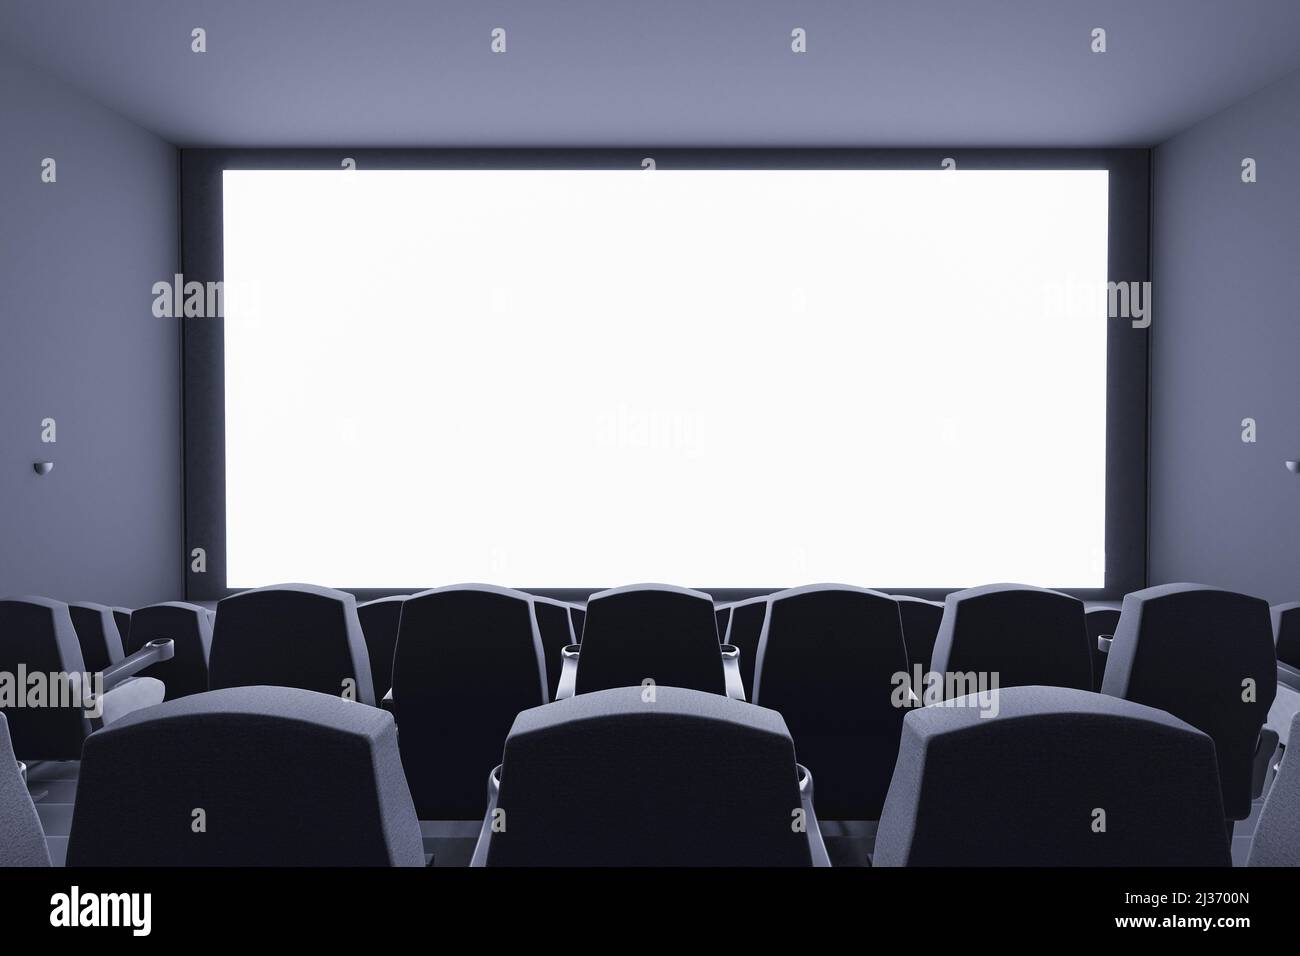 3d illustration of cinema auditorium with rows of empty seats and white screen for premiere poster Stock Photo